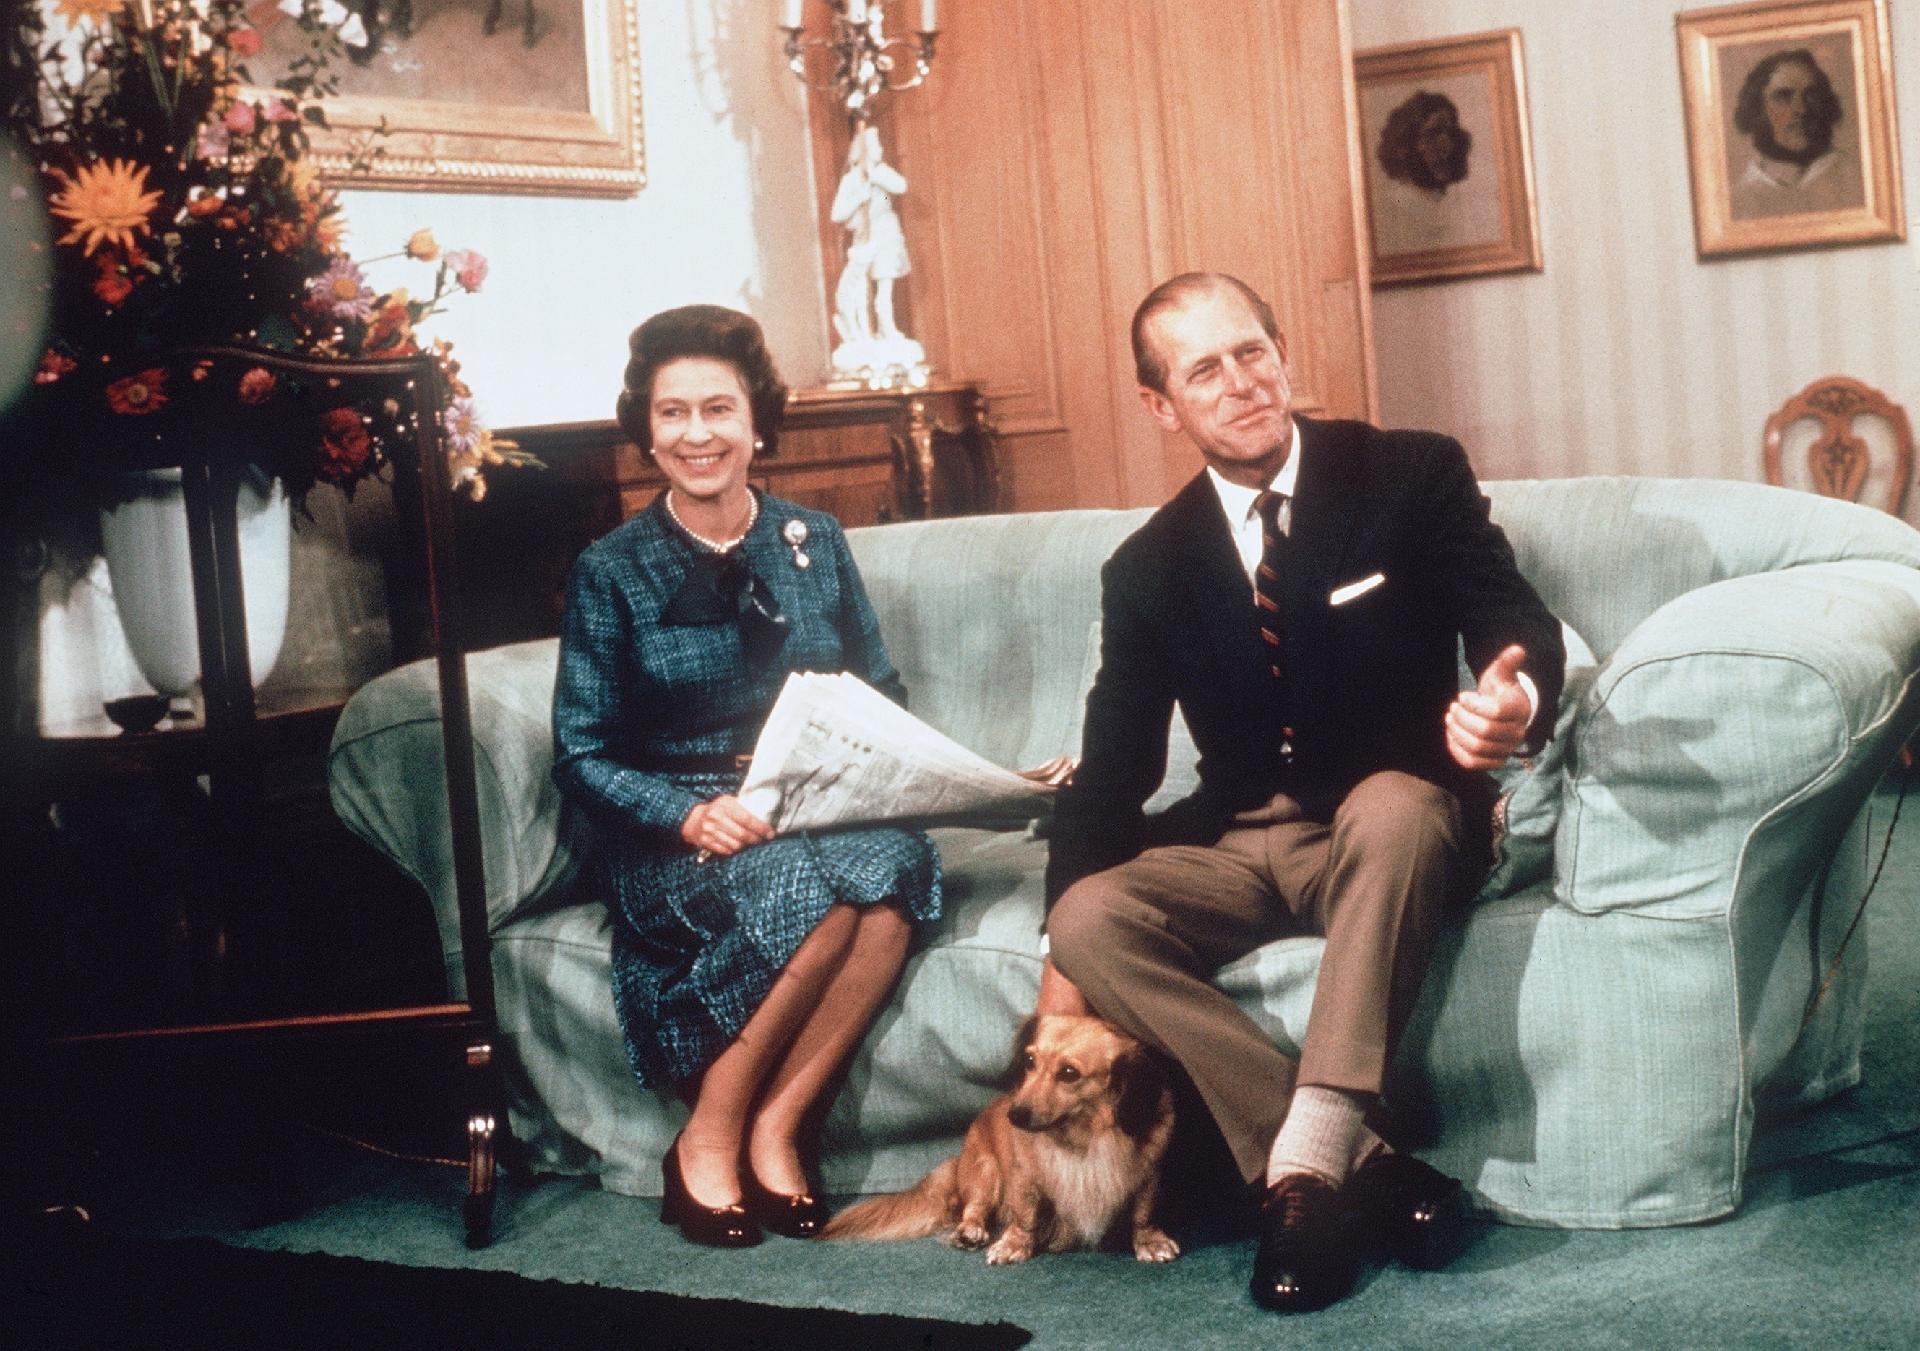 Queen Elizabeth II with Prince Phillip at Balmoral, Scotland, 1975 - Getty Images